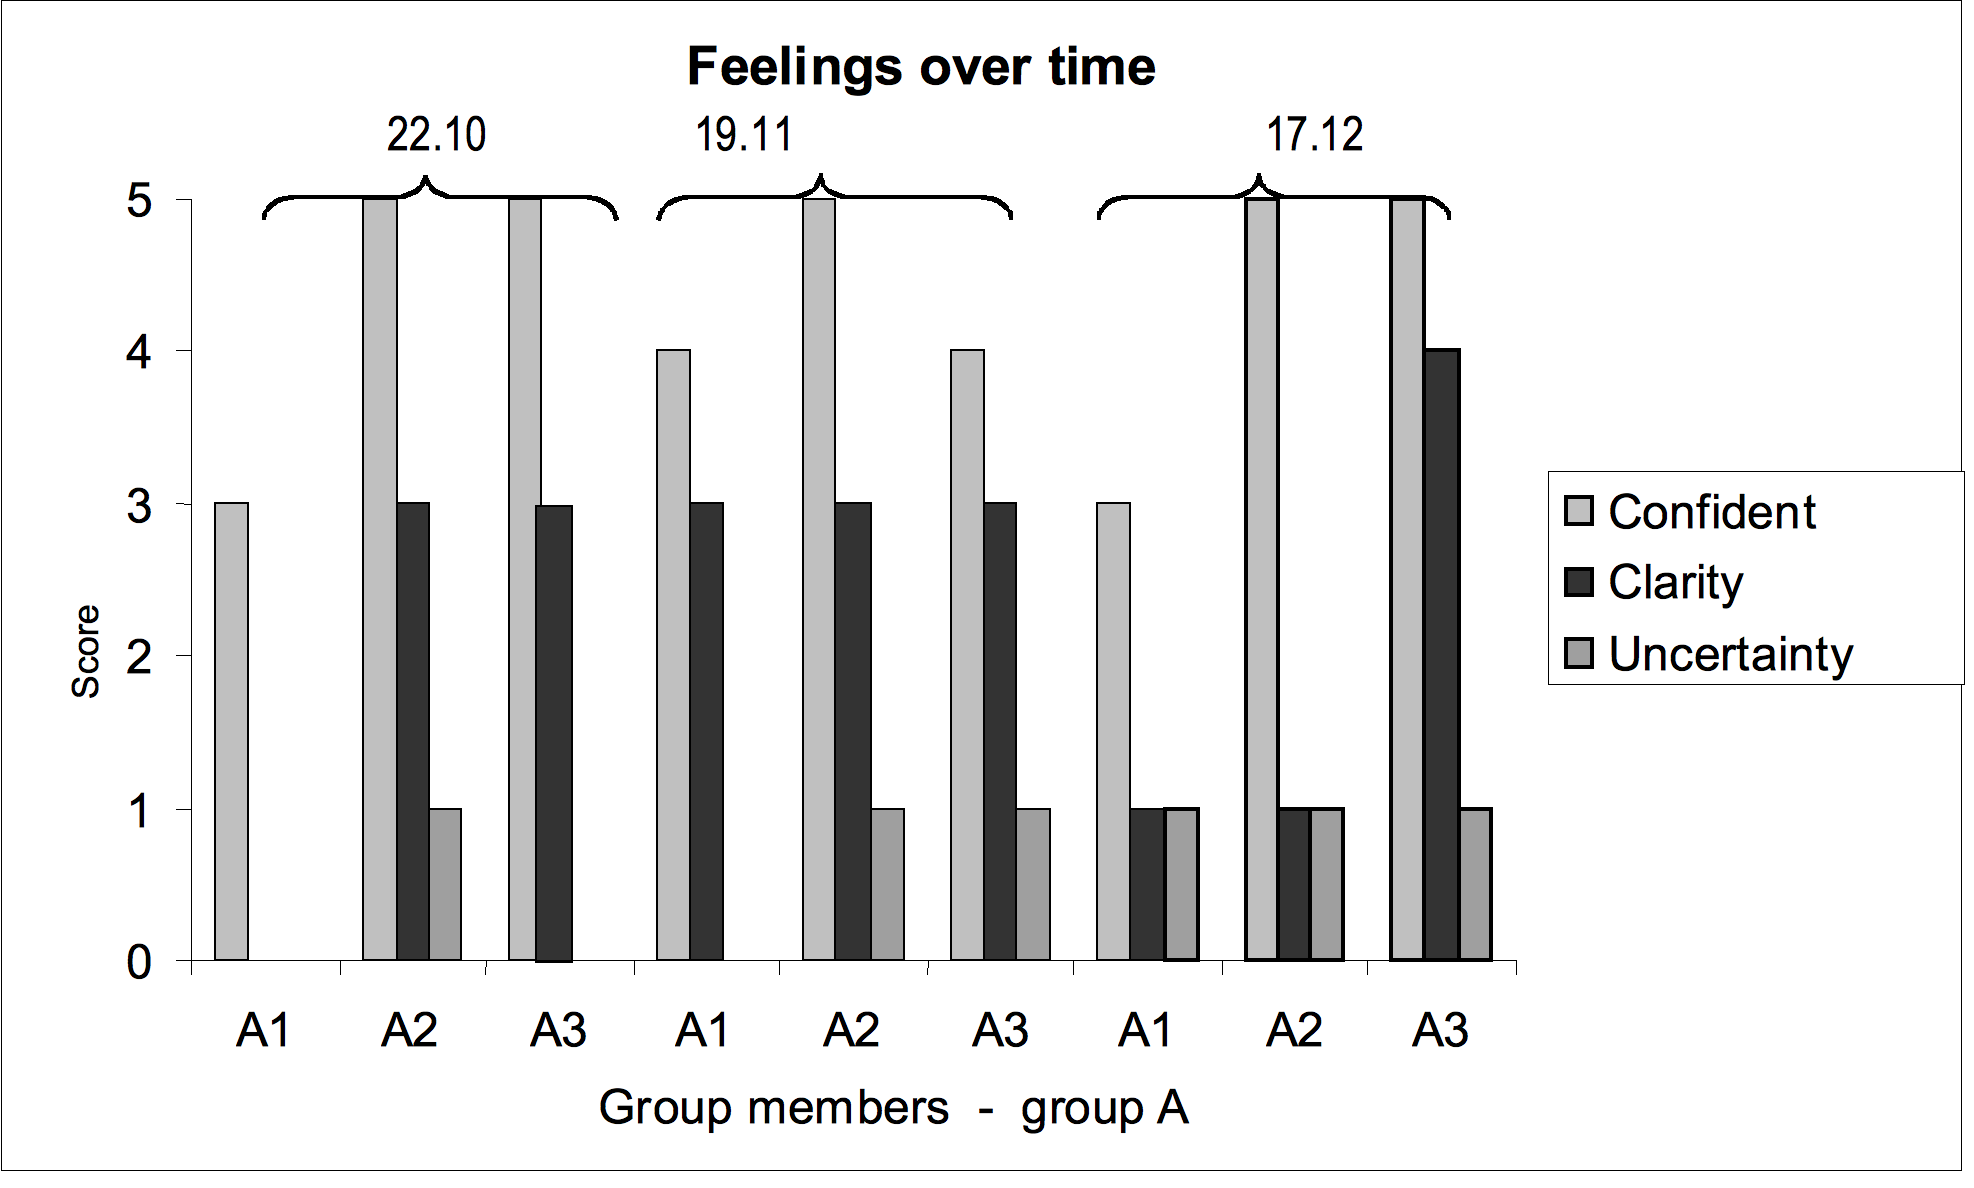 Figure 1: Perceived experiences of confidence, clarity and uncertainty: Group A-members